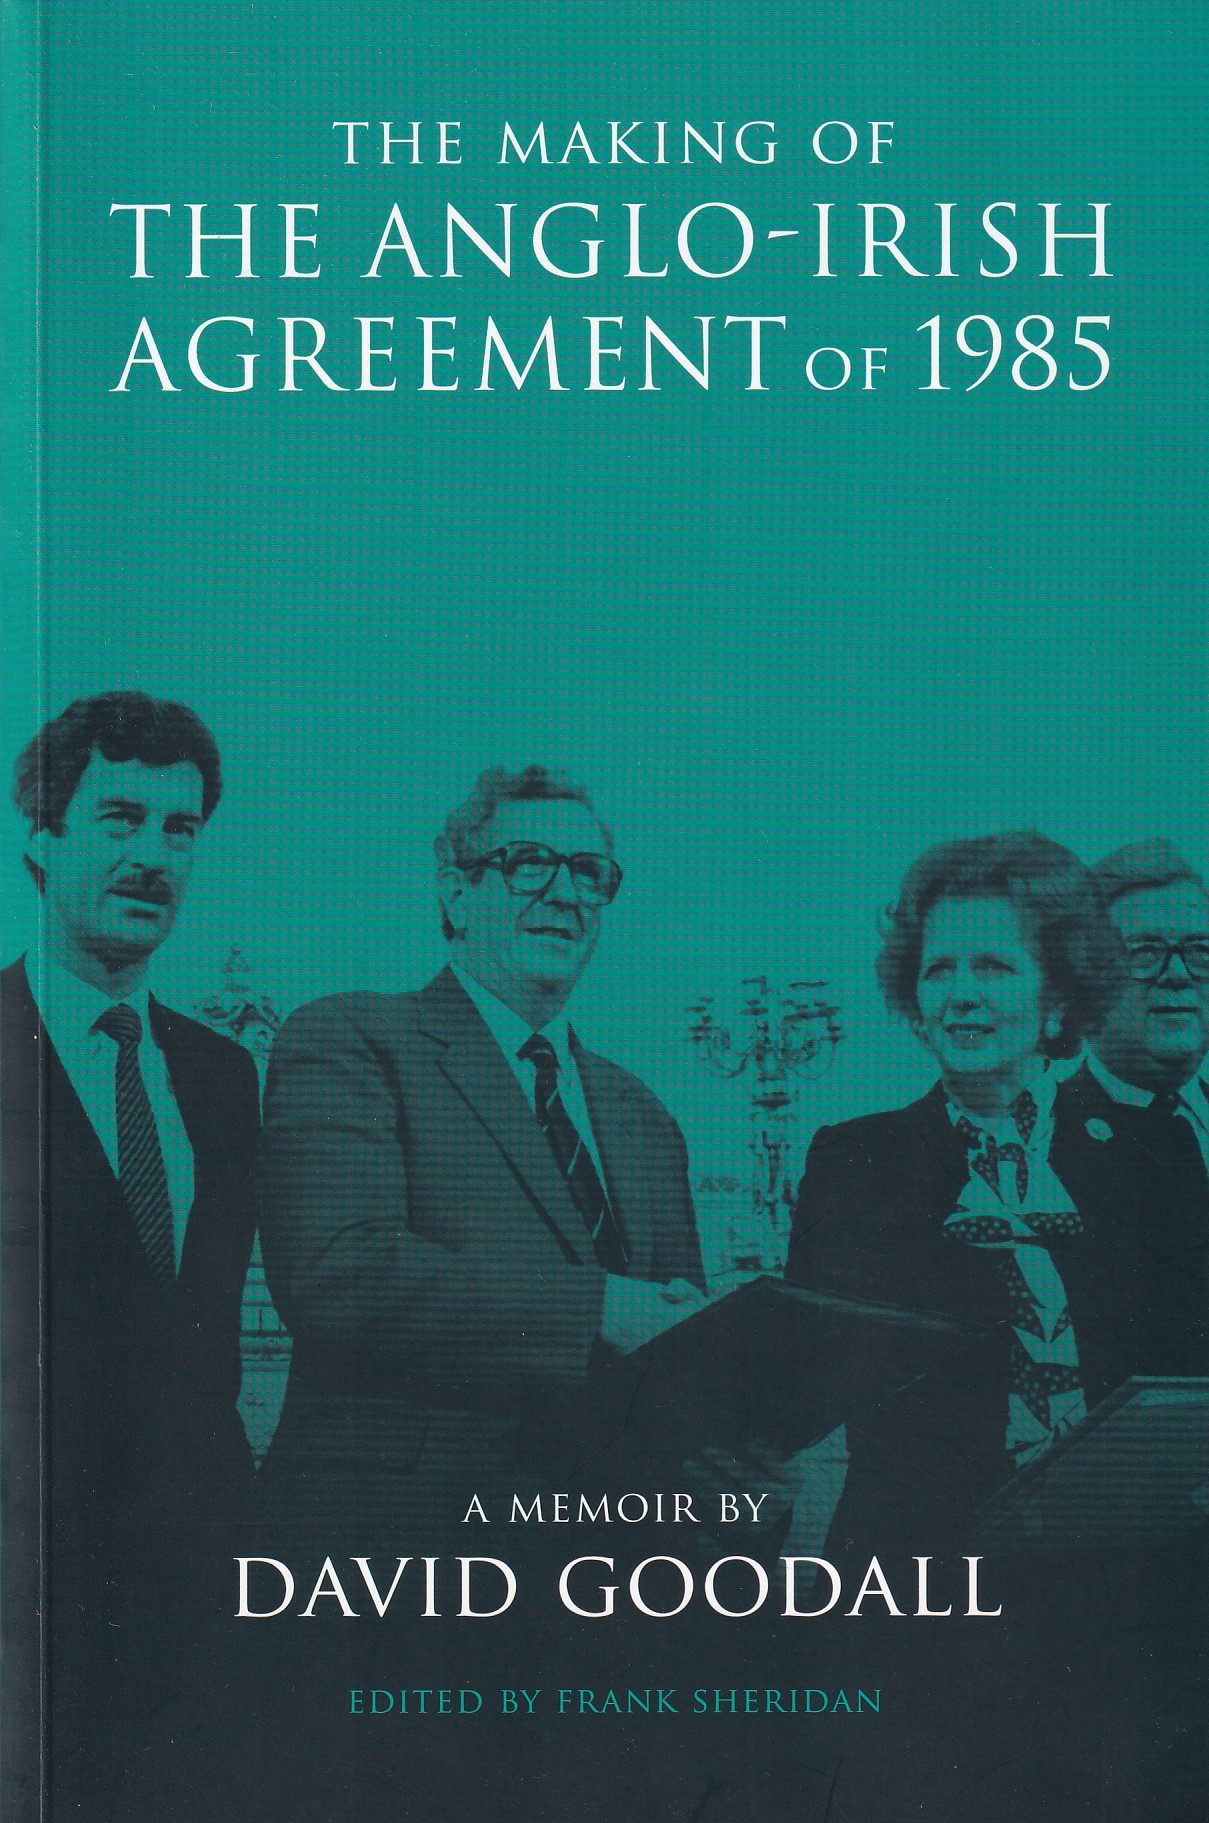 The Making of the Anglo-Irish Agreement of 1985 | David Goodall, Frank Sheridan (ed.) | Charlie Byrne's